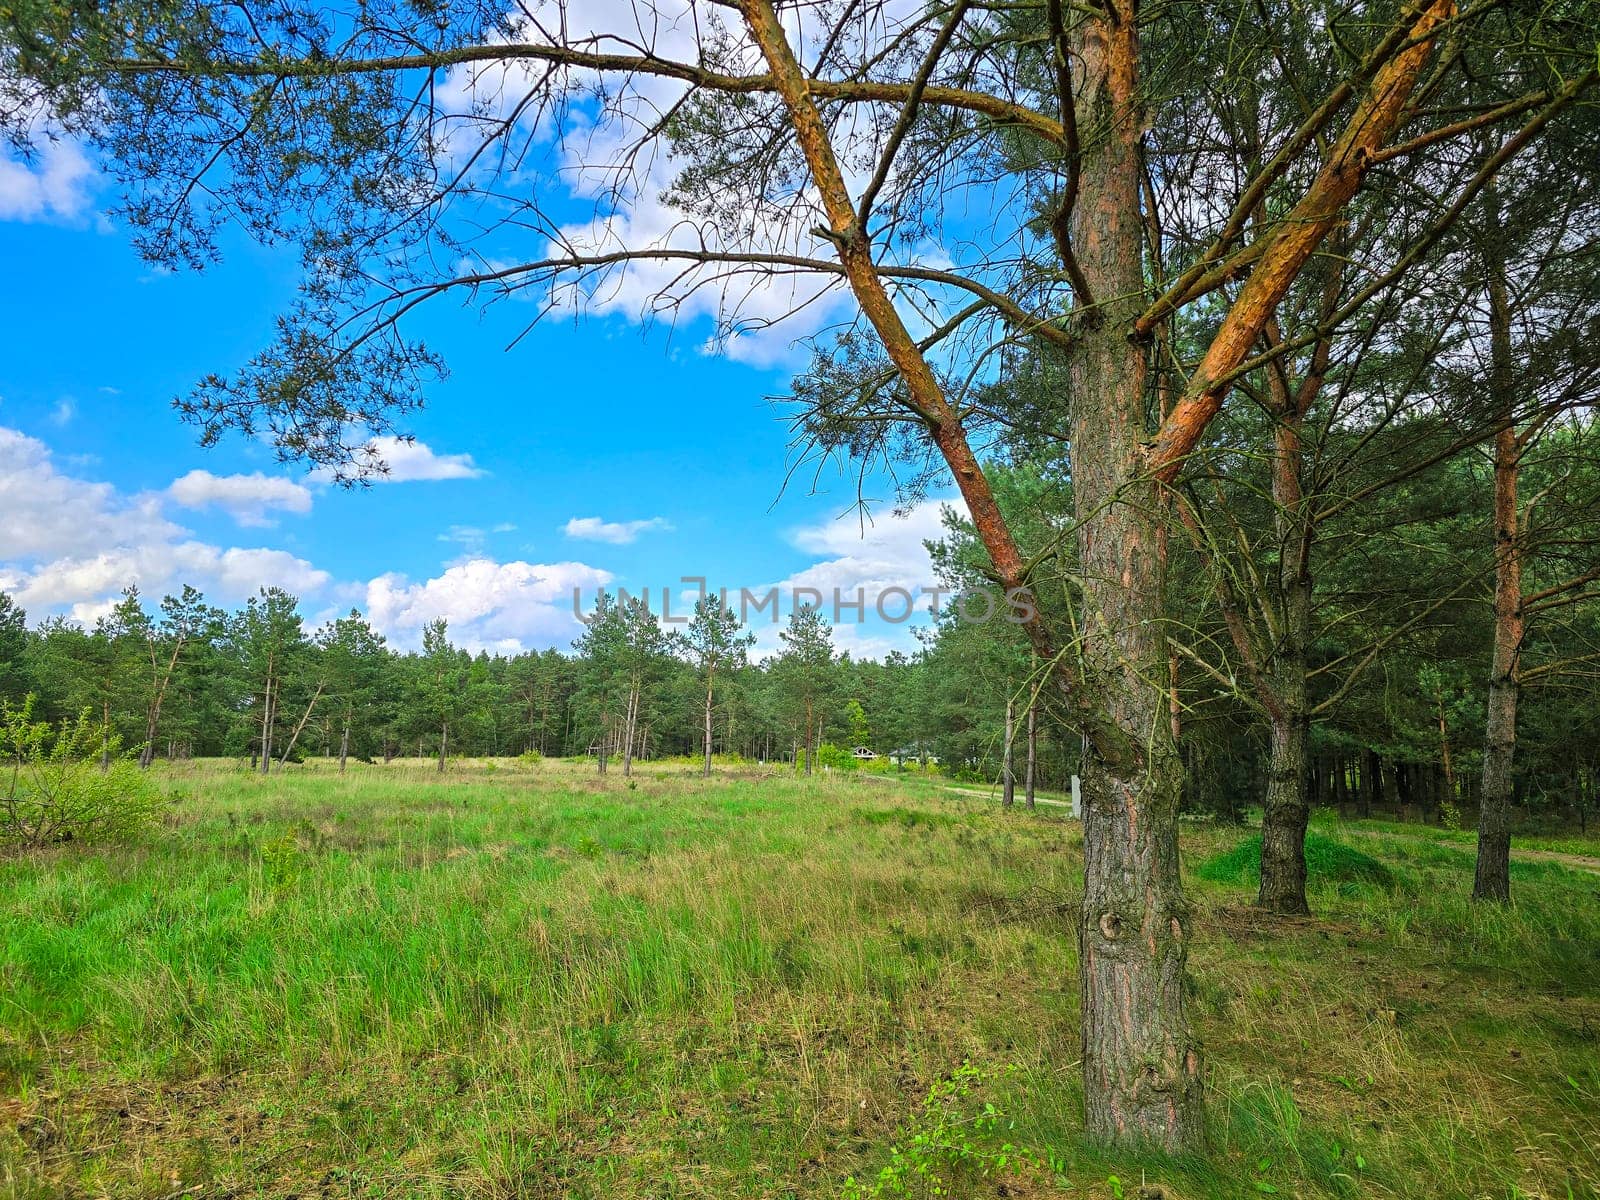 A pine tree, grass in the green forest, blue cloudy sky. High quality photo